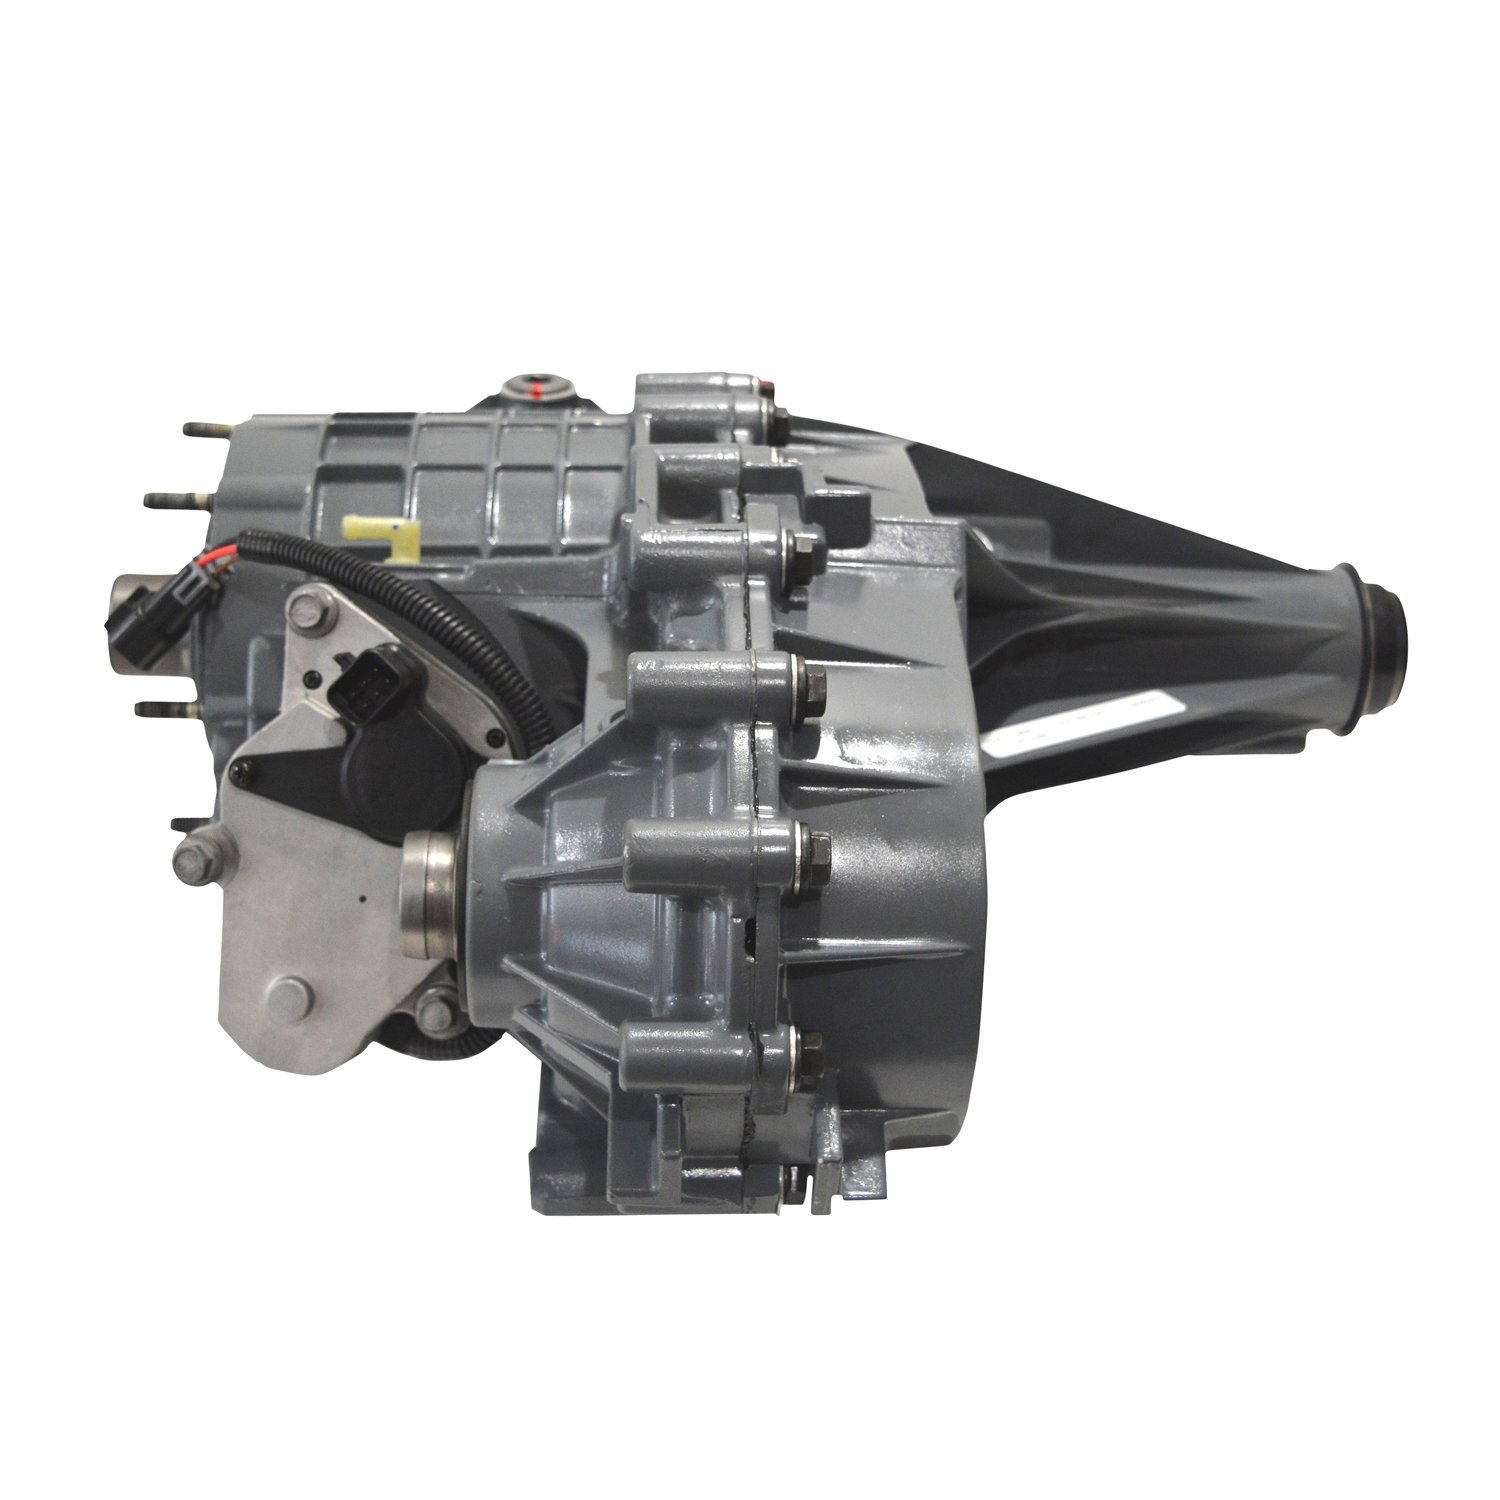 Remanufactured Transfer Case for 1999-2002 General Motors with 4L80E